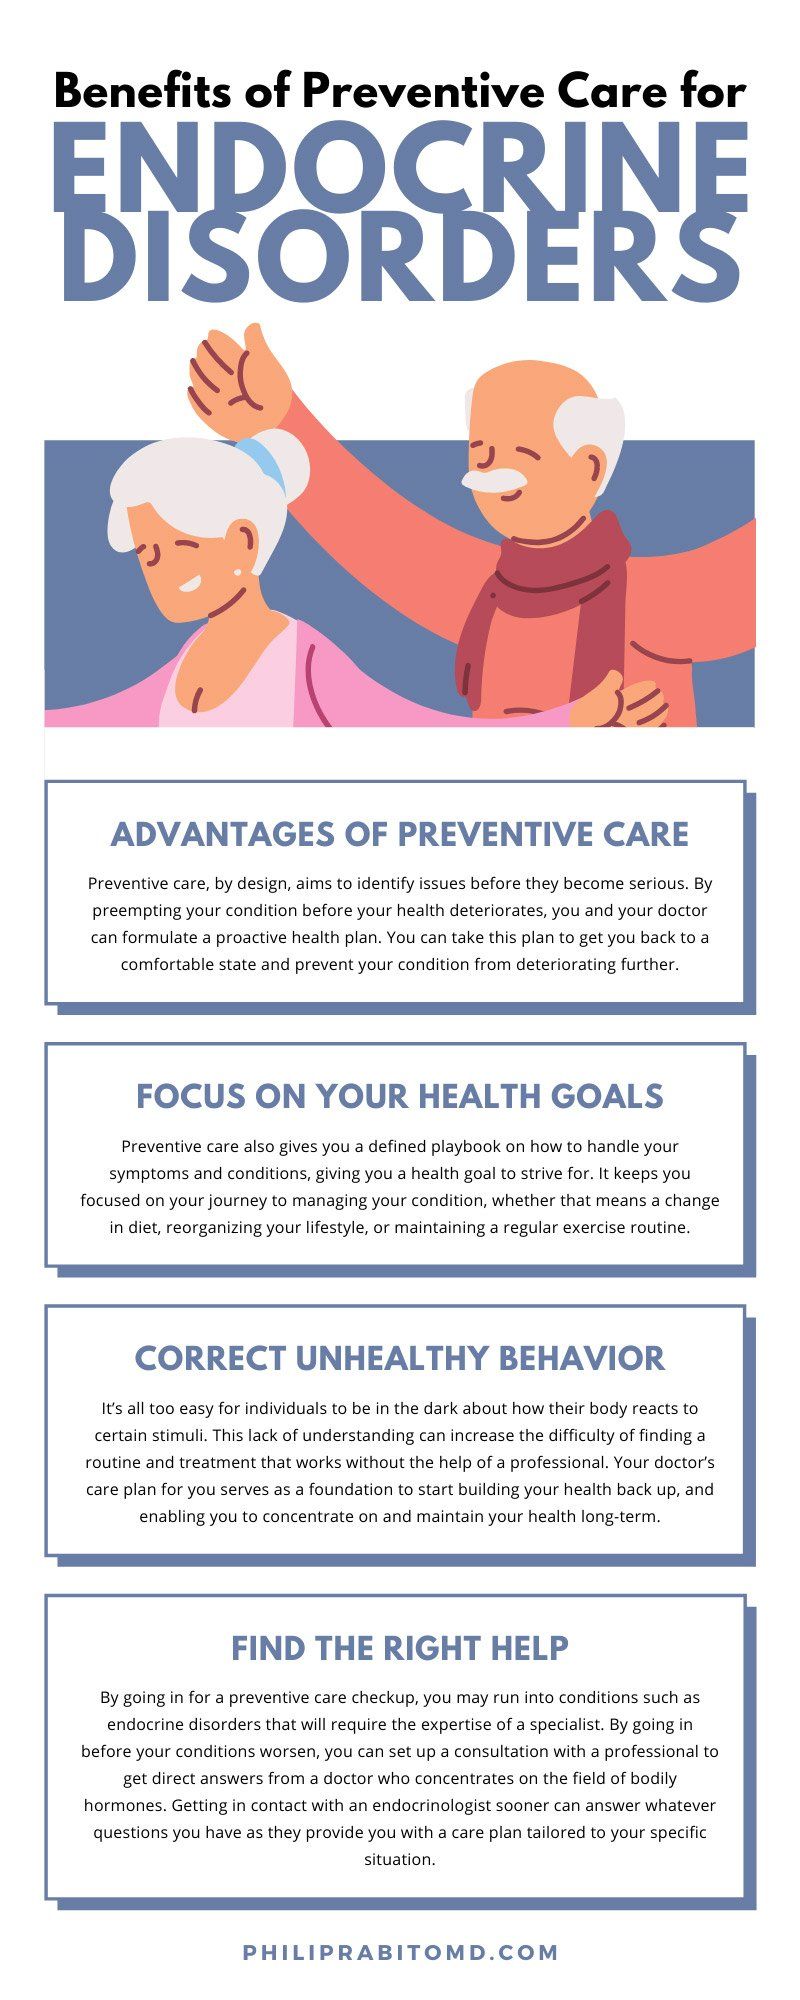 Benefits of Preventive Care for Endocrine Disorders